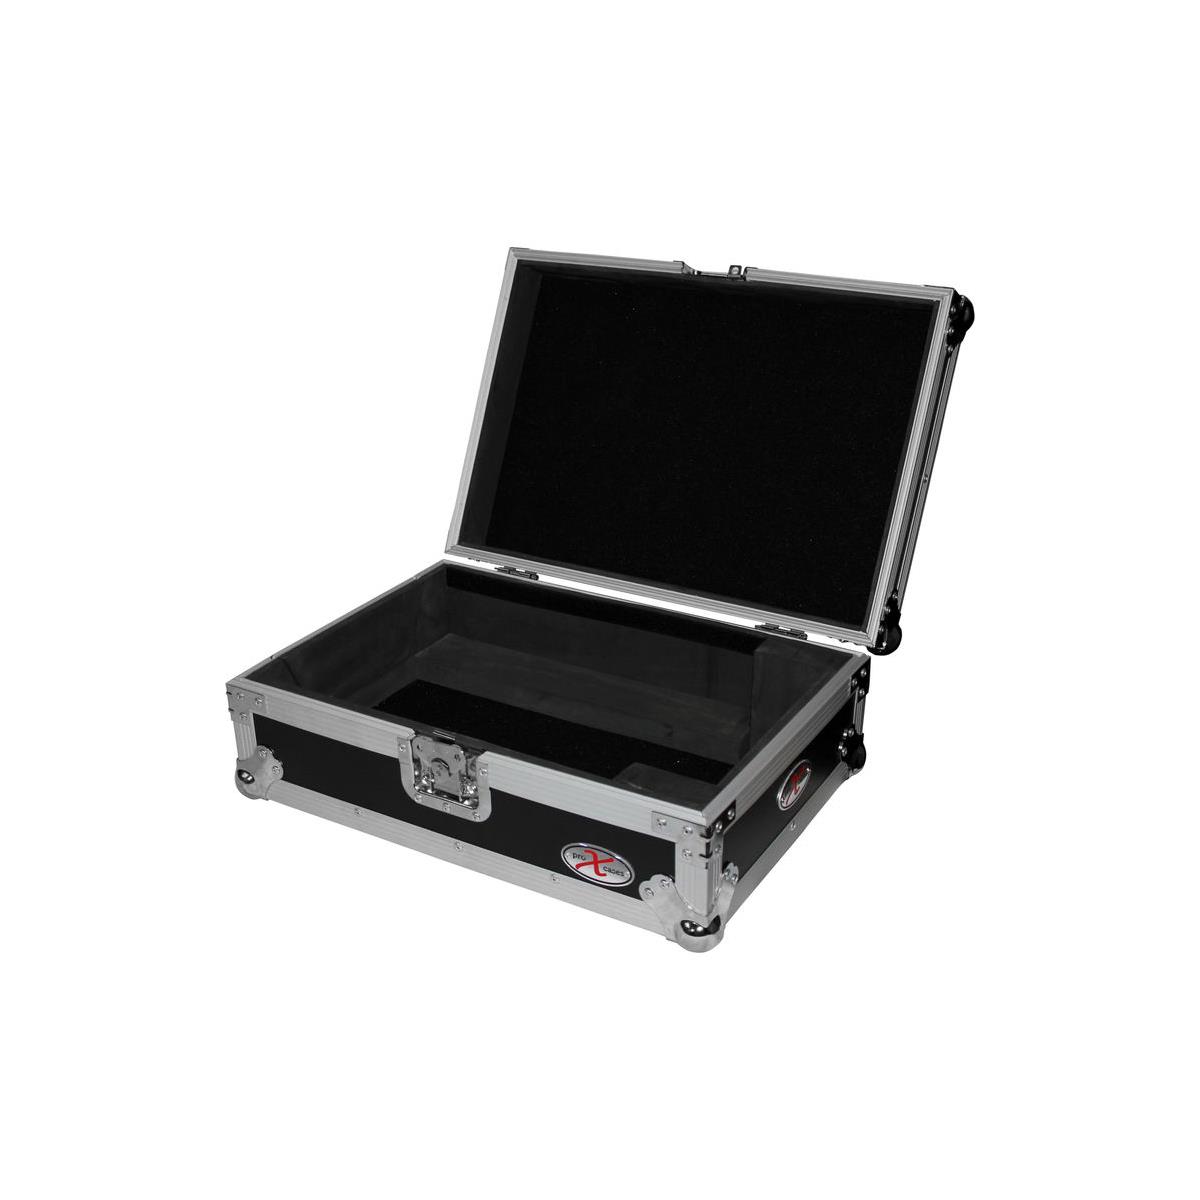 Image of ProX XS-CD ATA Flight Hard Case for Large Format CD/Media Player